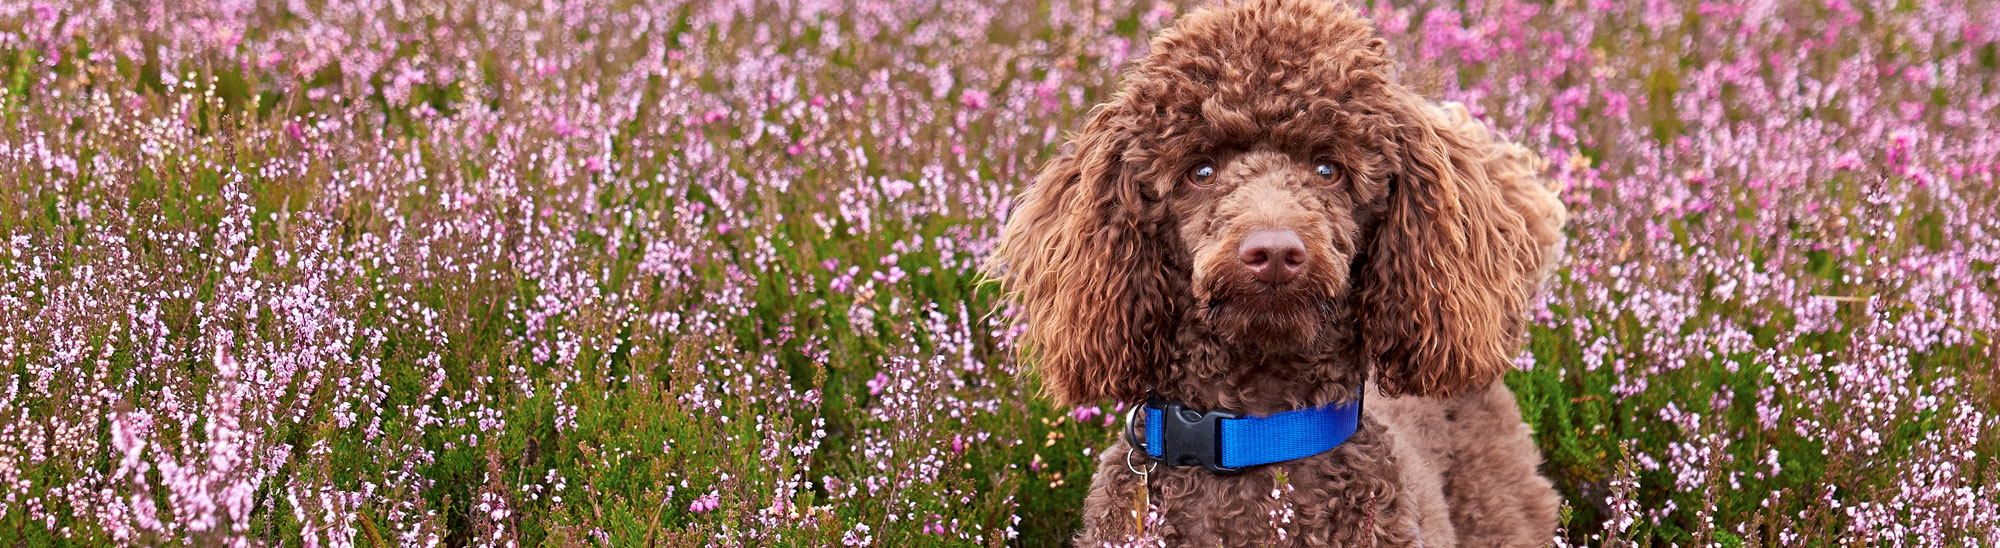 Fluffy brown dog in field of flowers